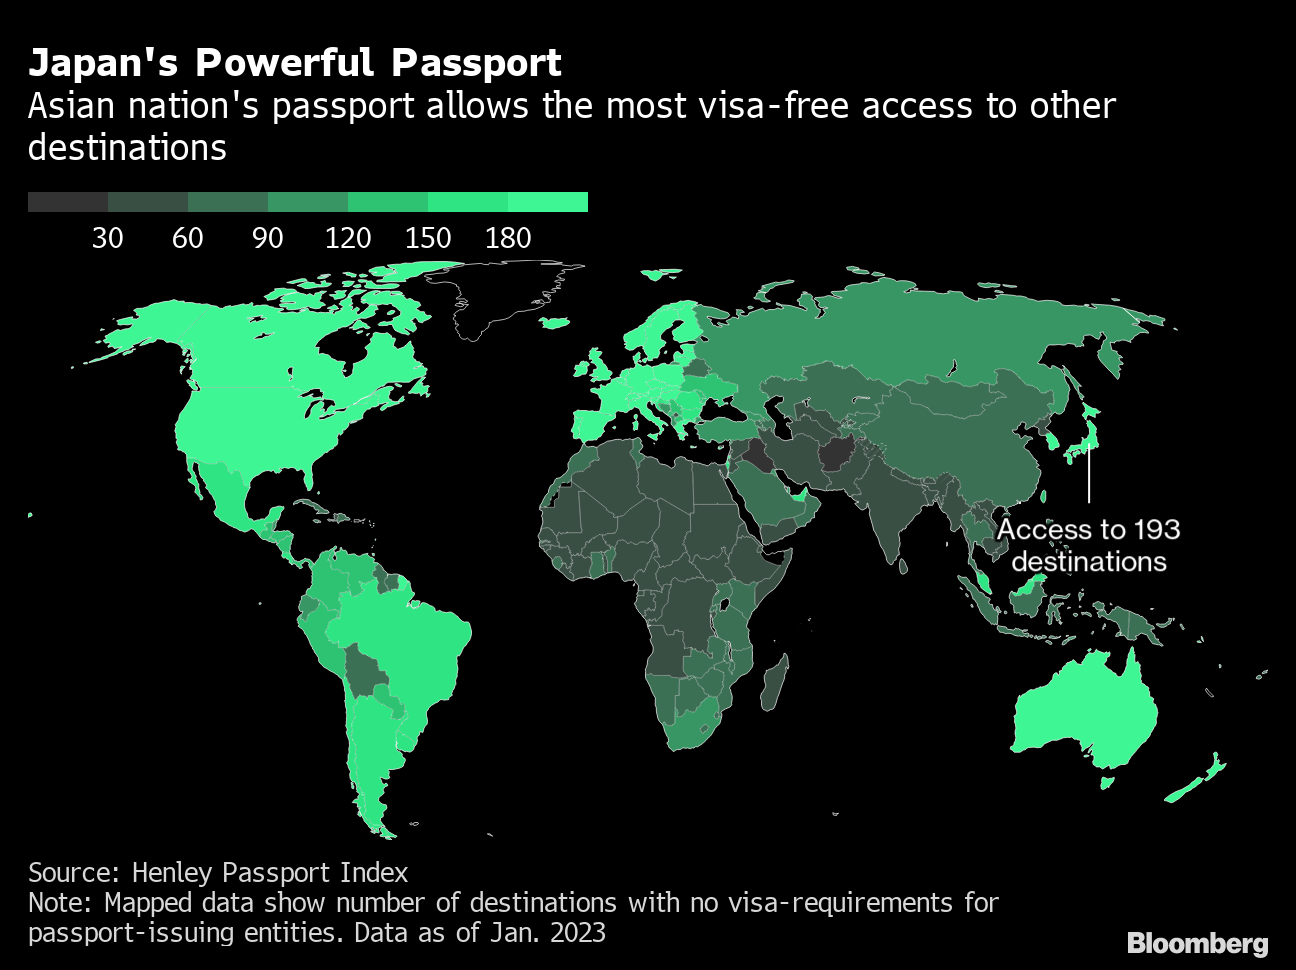 Most Powerful Passports 2023 Are Japan, Singapore, South Korea on Henley  Index - Bloomberg